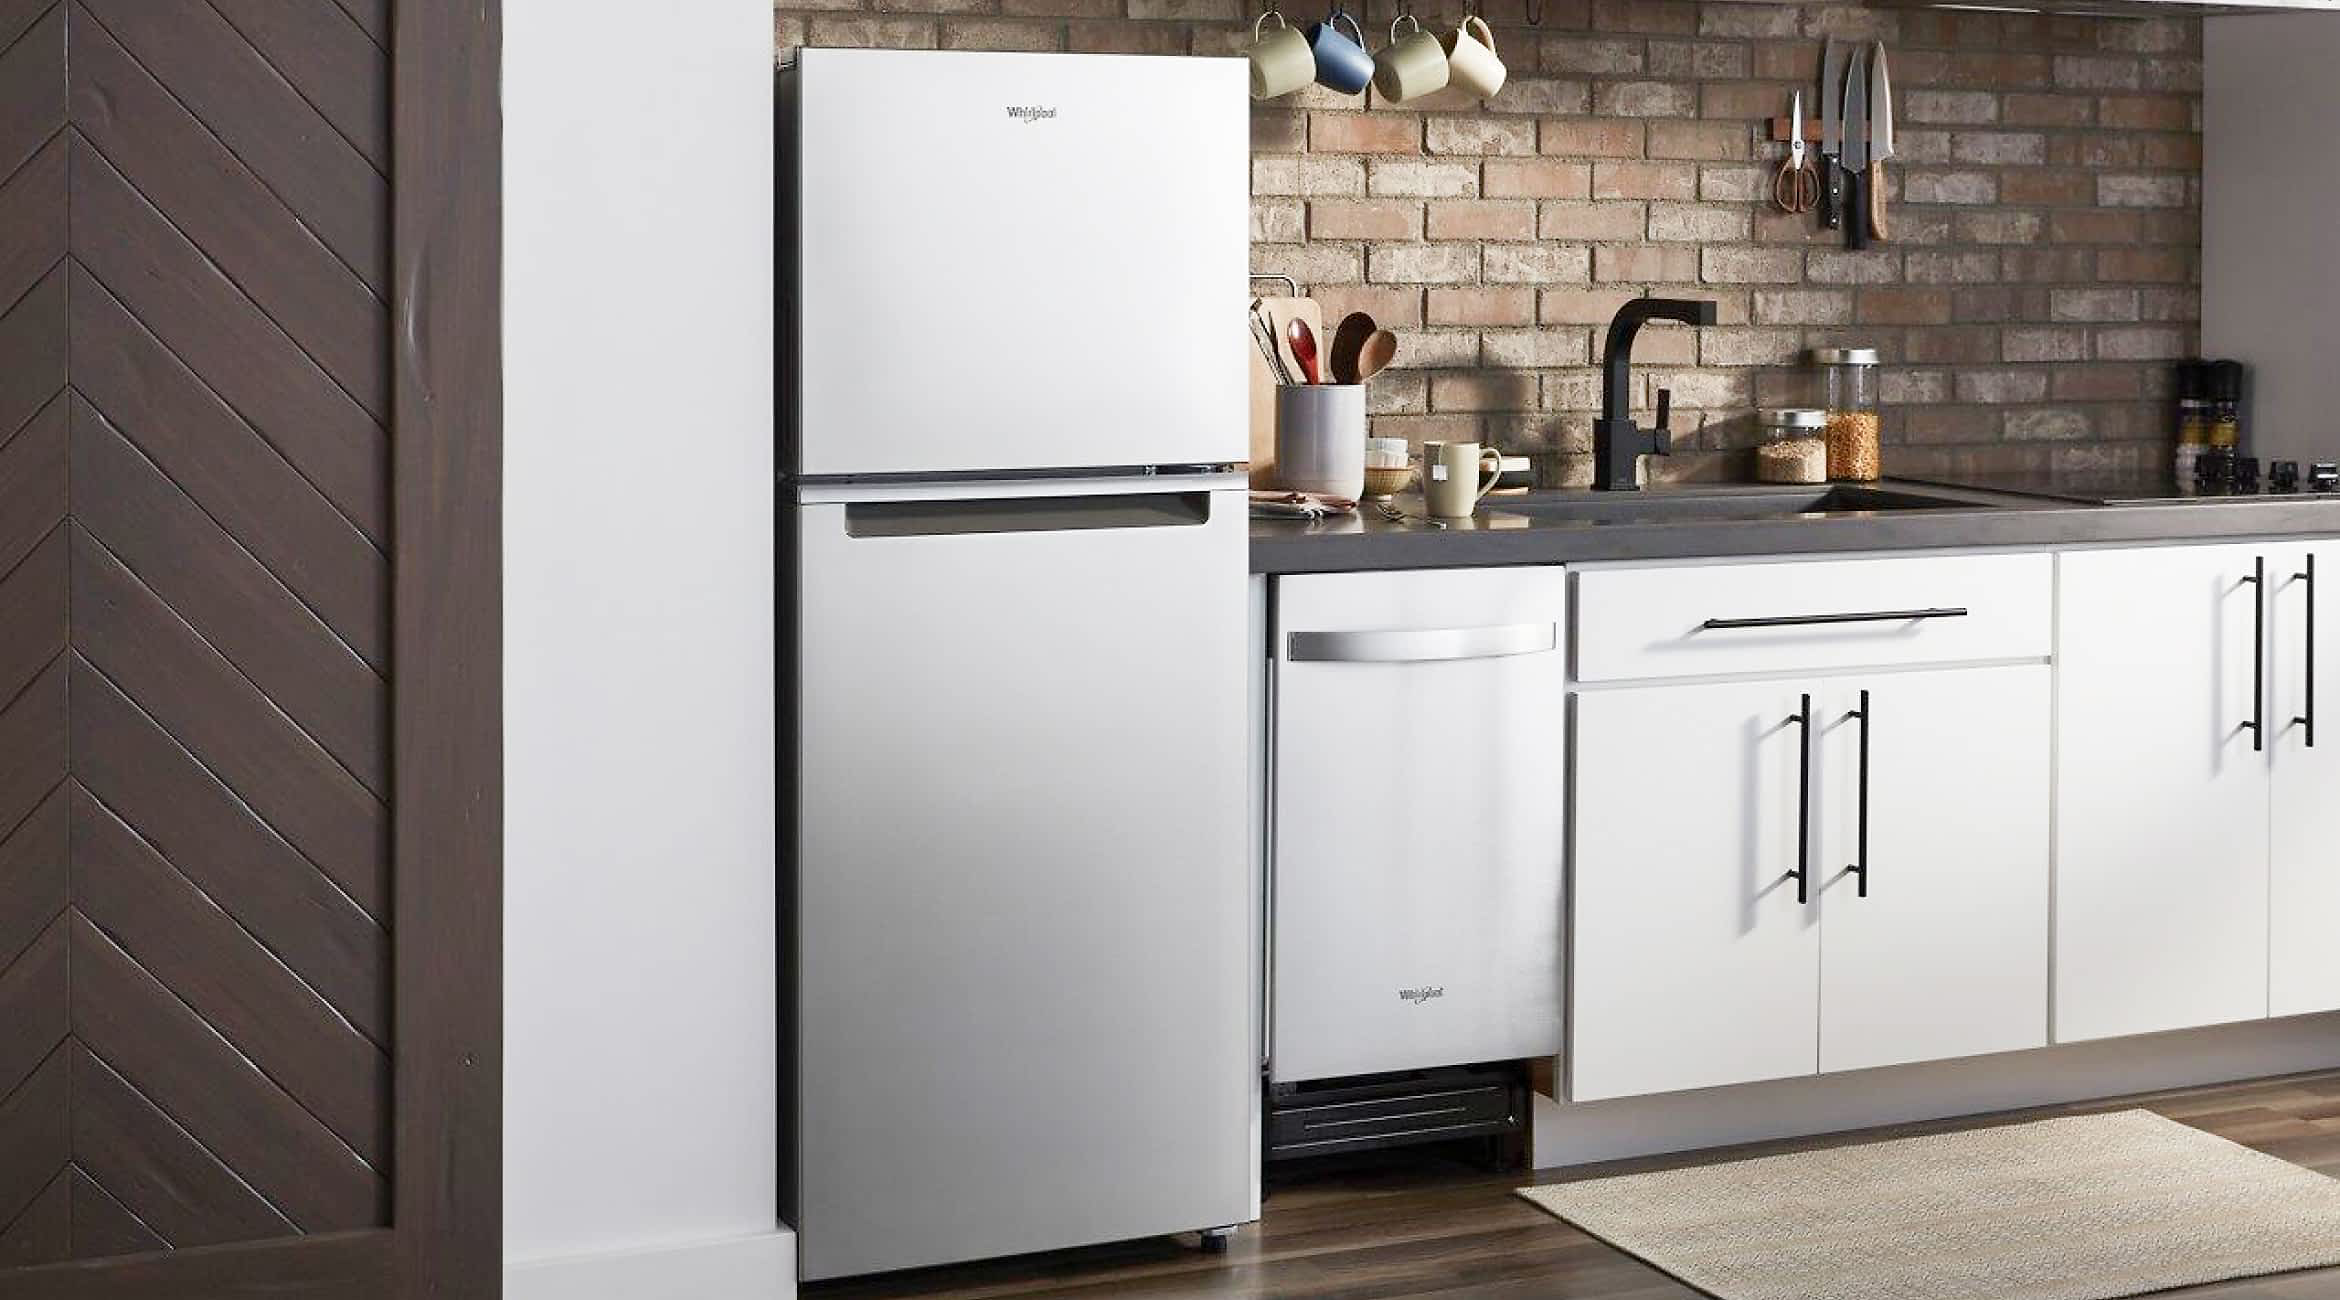 A Whirlpool® Top Freezer Refrigerator in a city kitchen